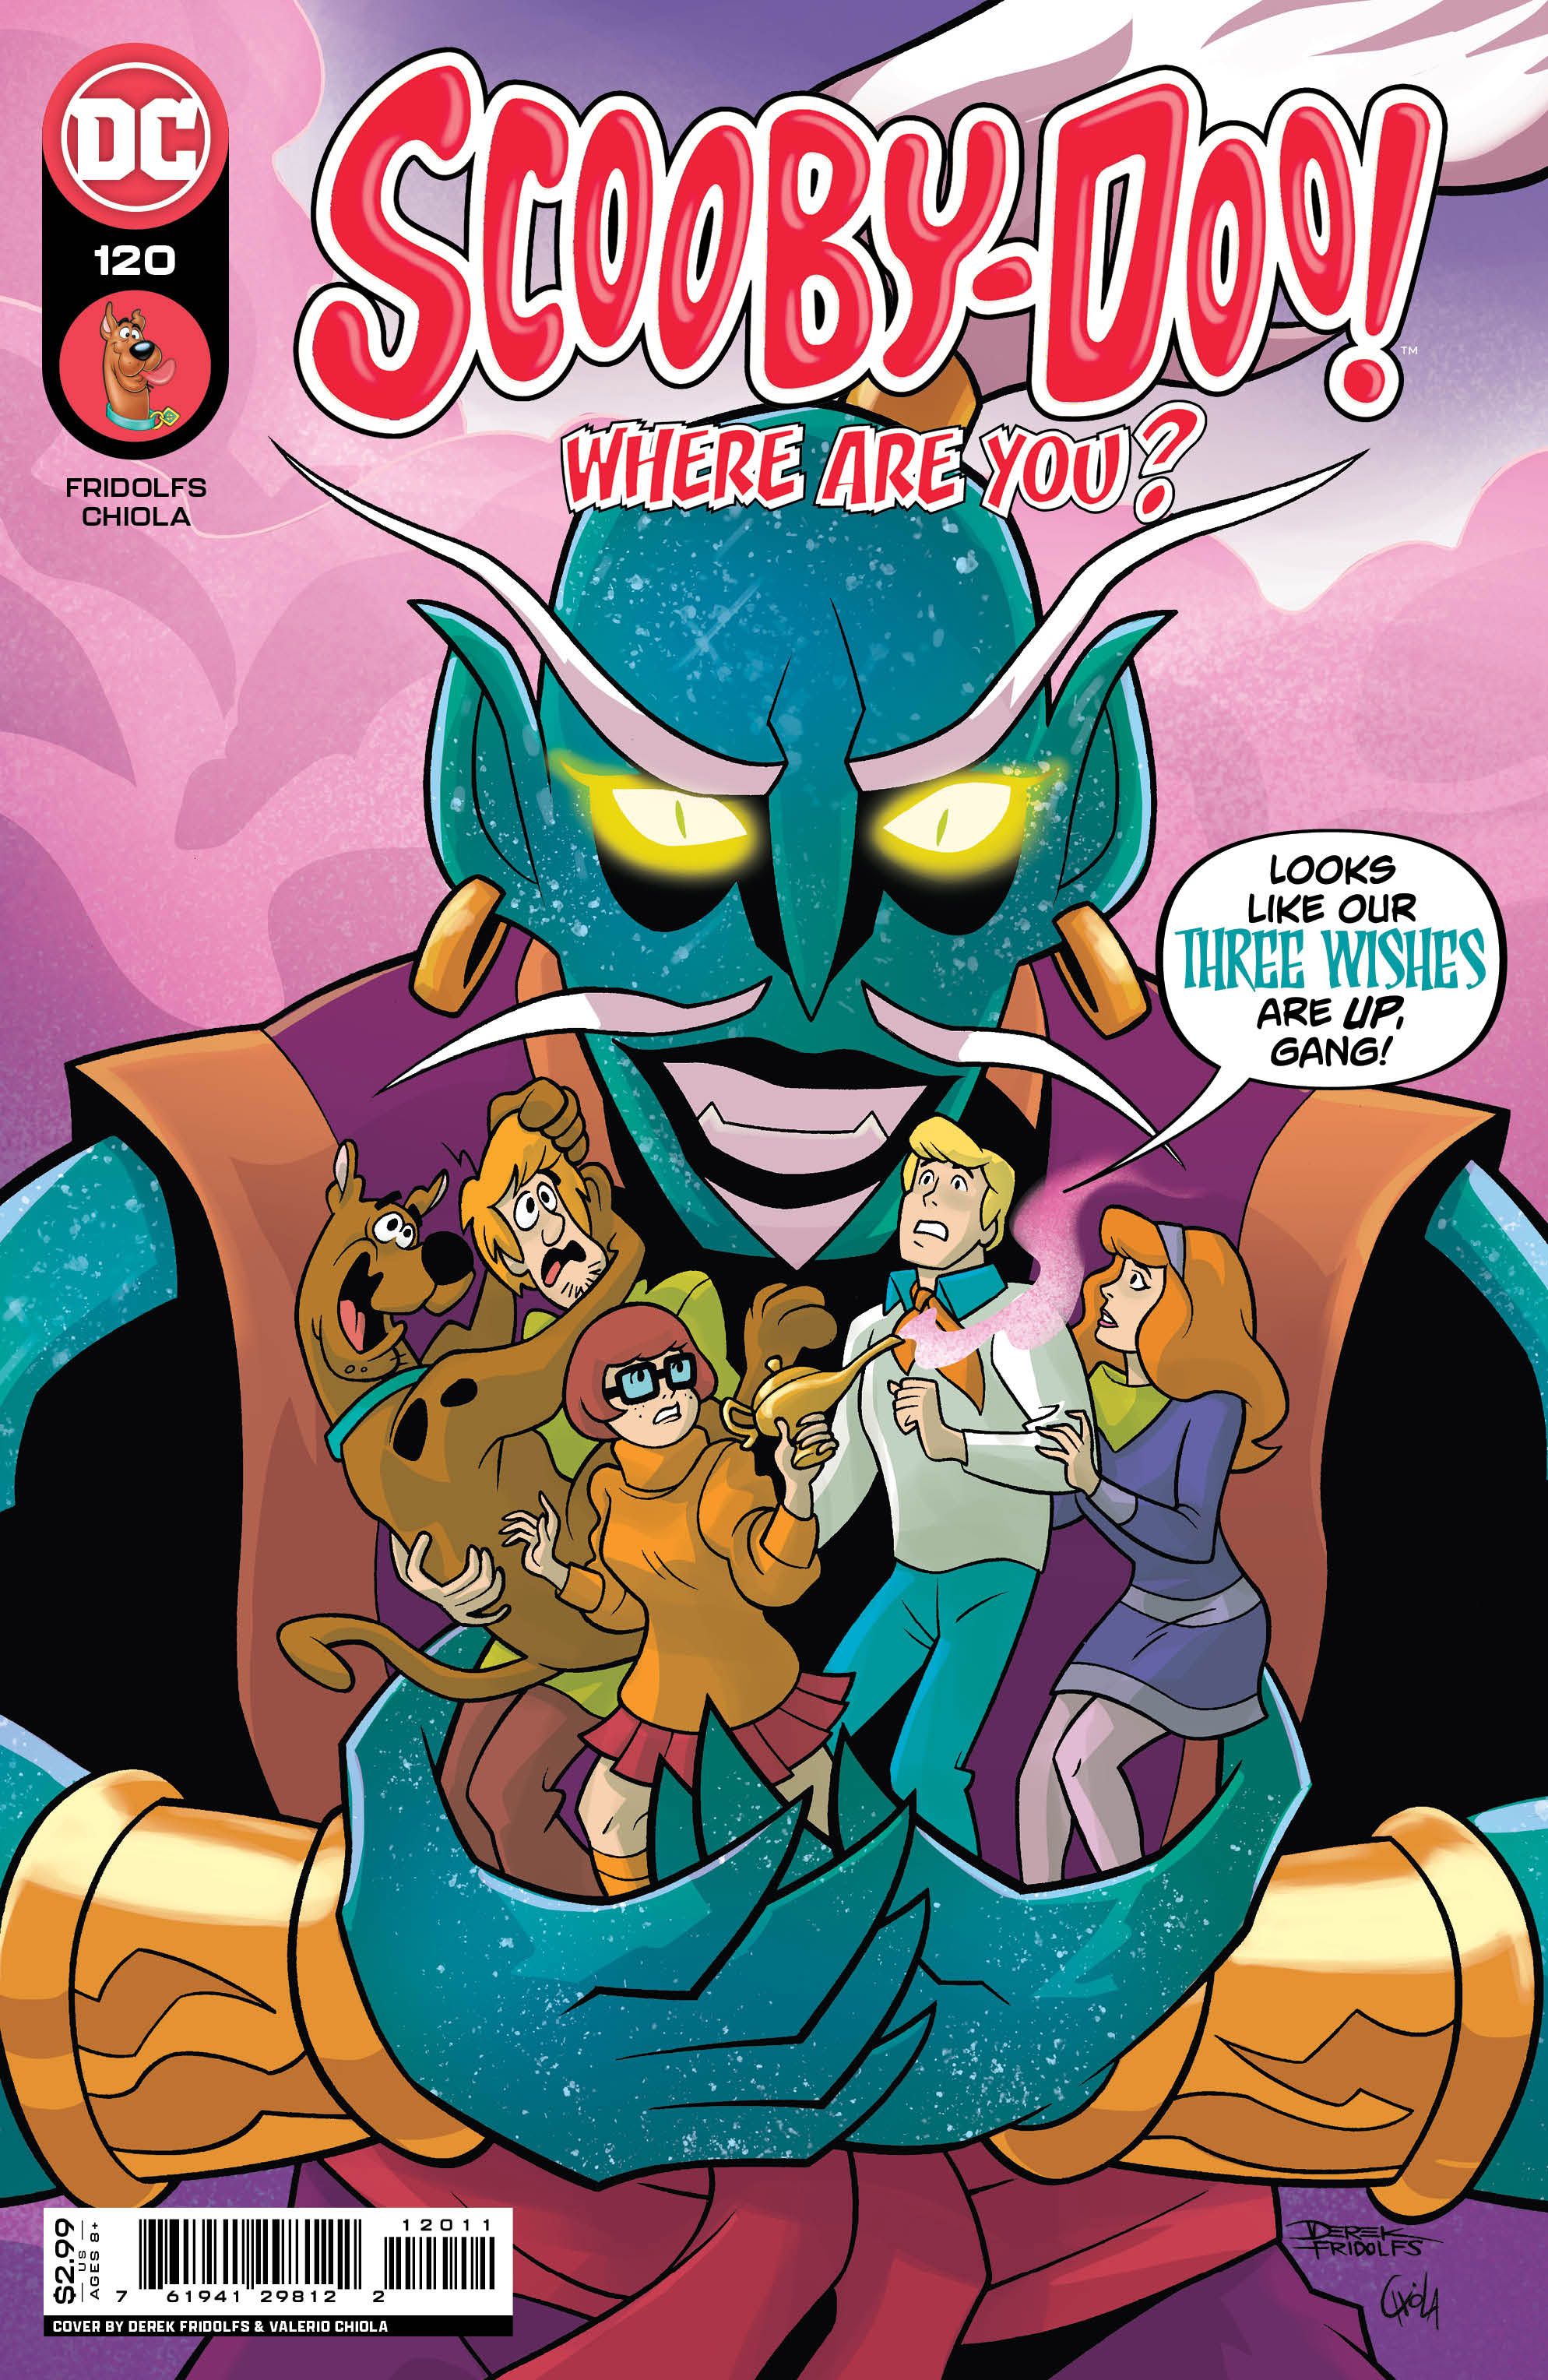 Scooby-Doo, Where Are You? #120 Comic